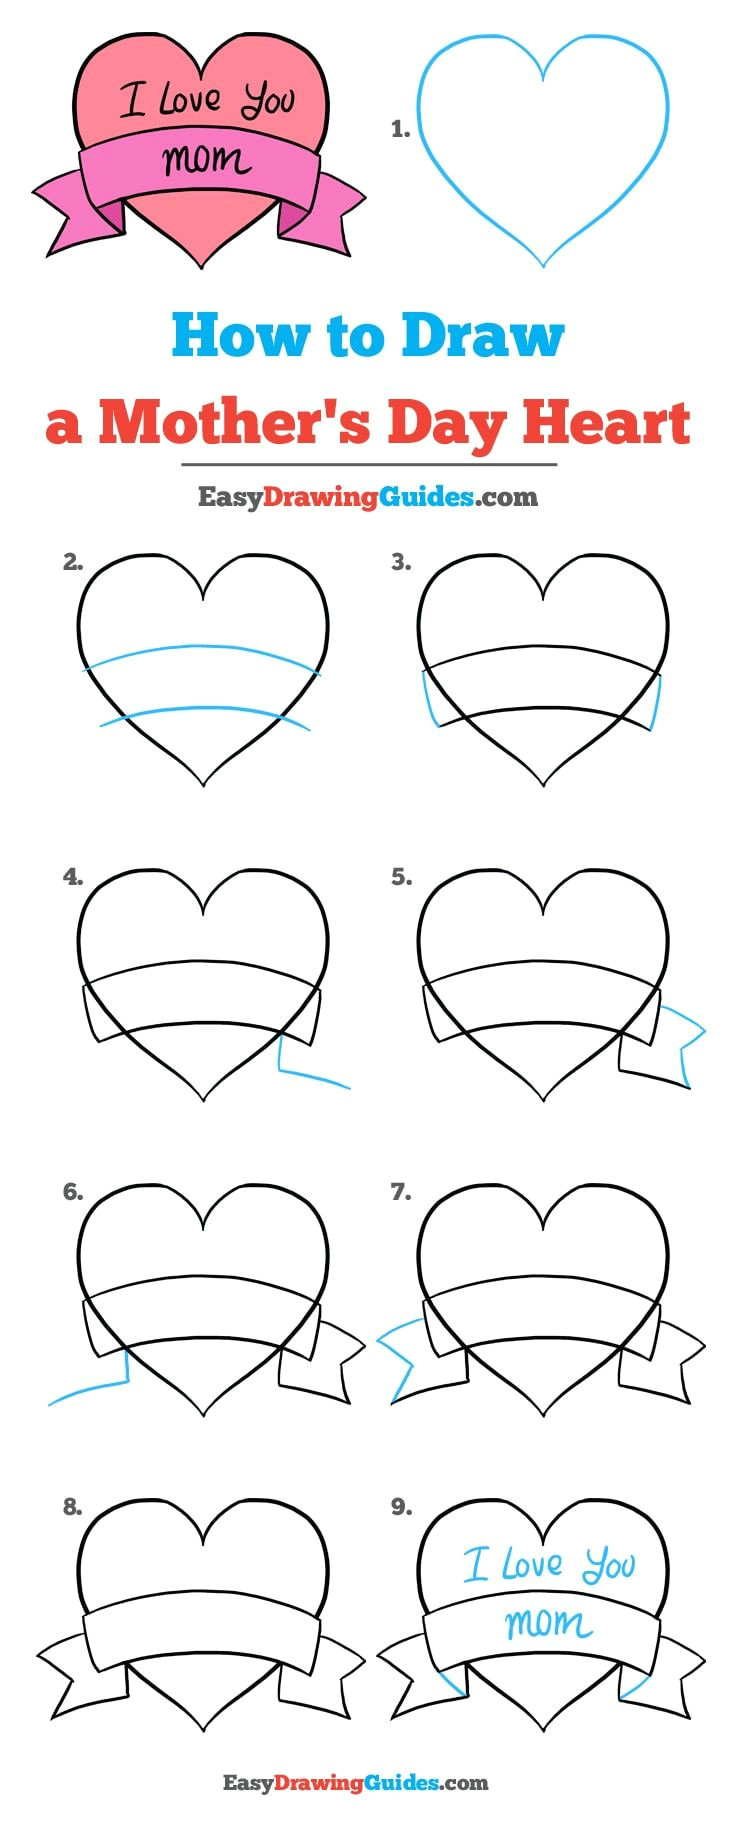 Easy Drawings for Mom How to Draw A Mother S Day Heart Really Easy Drawing Tutorial